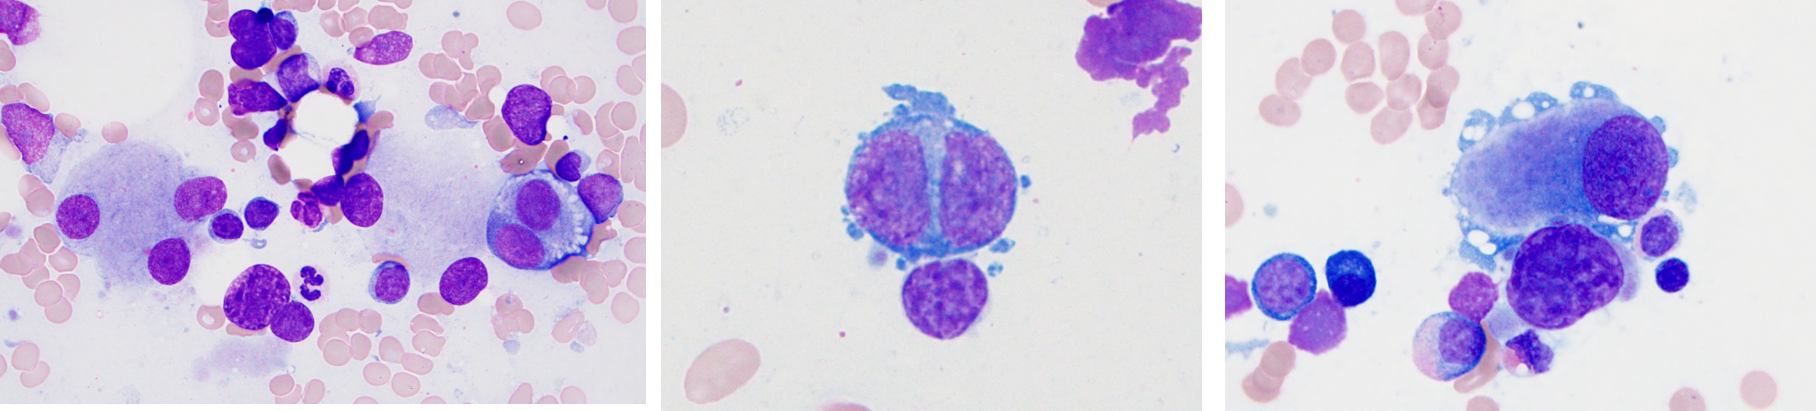 three images of myeloid cells